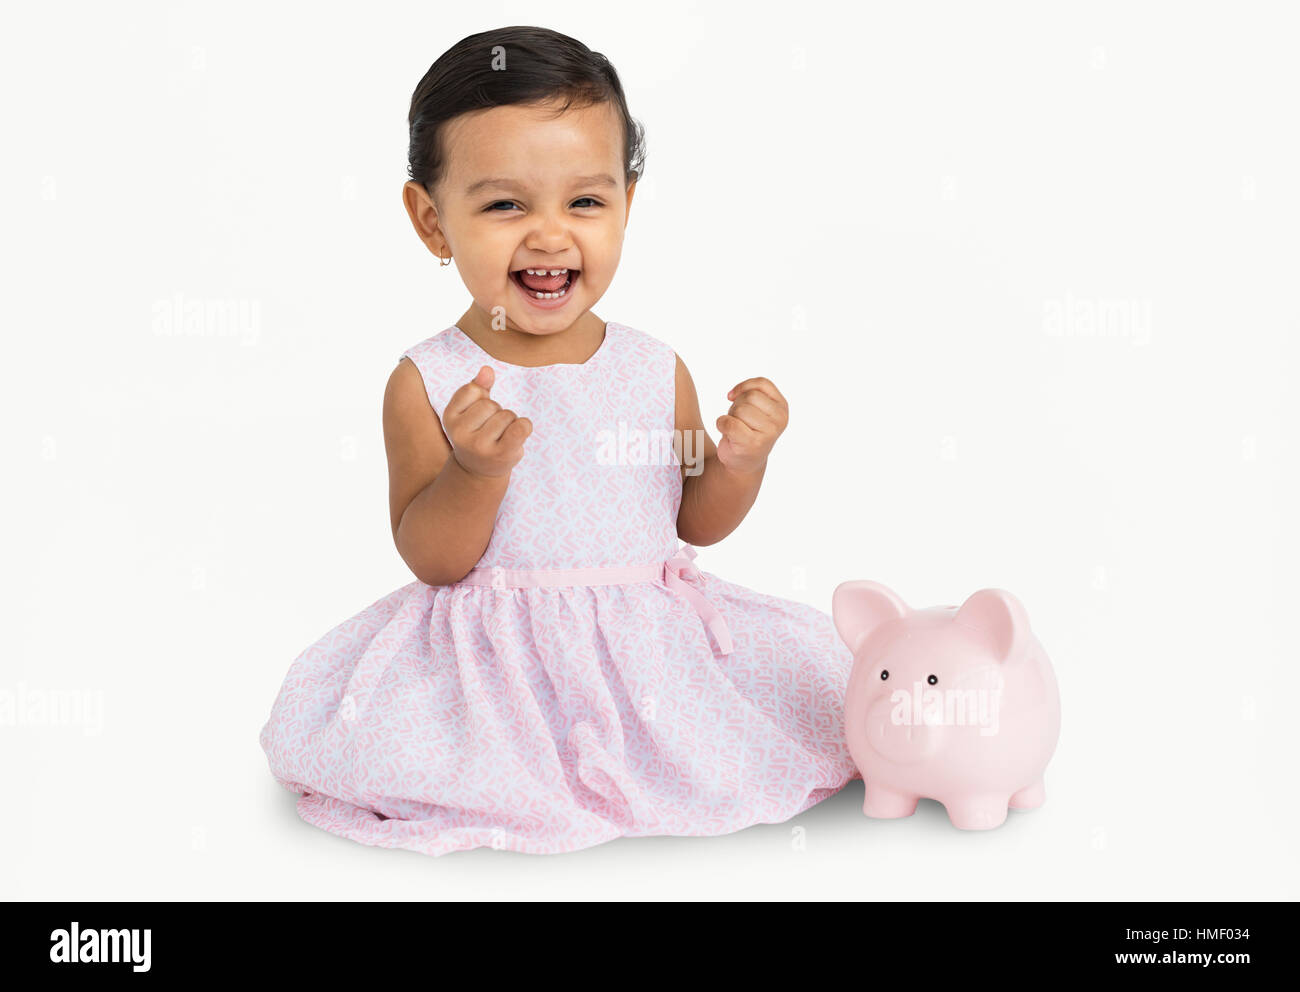 Cheerful Kid Have Fun Smiling Concept Stock Photo